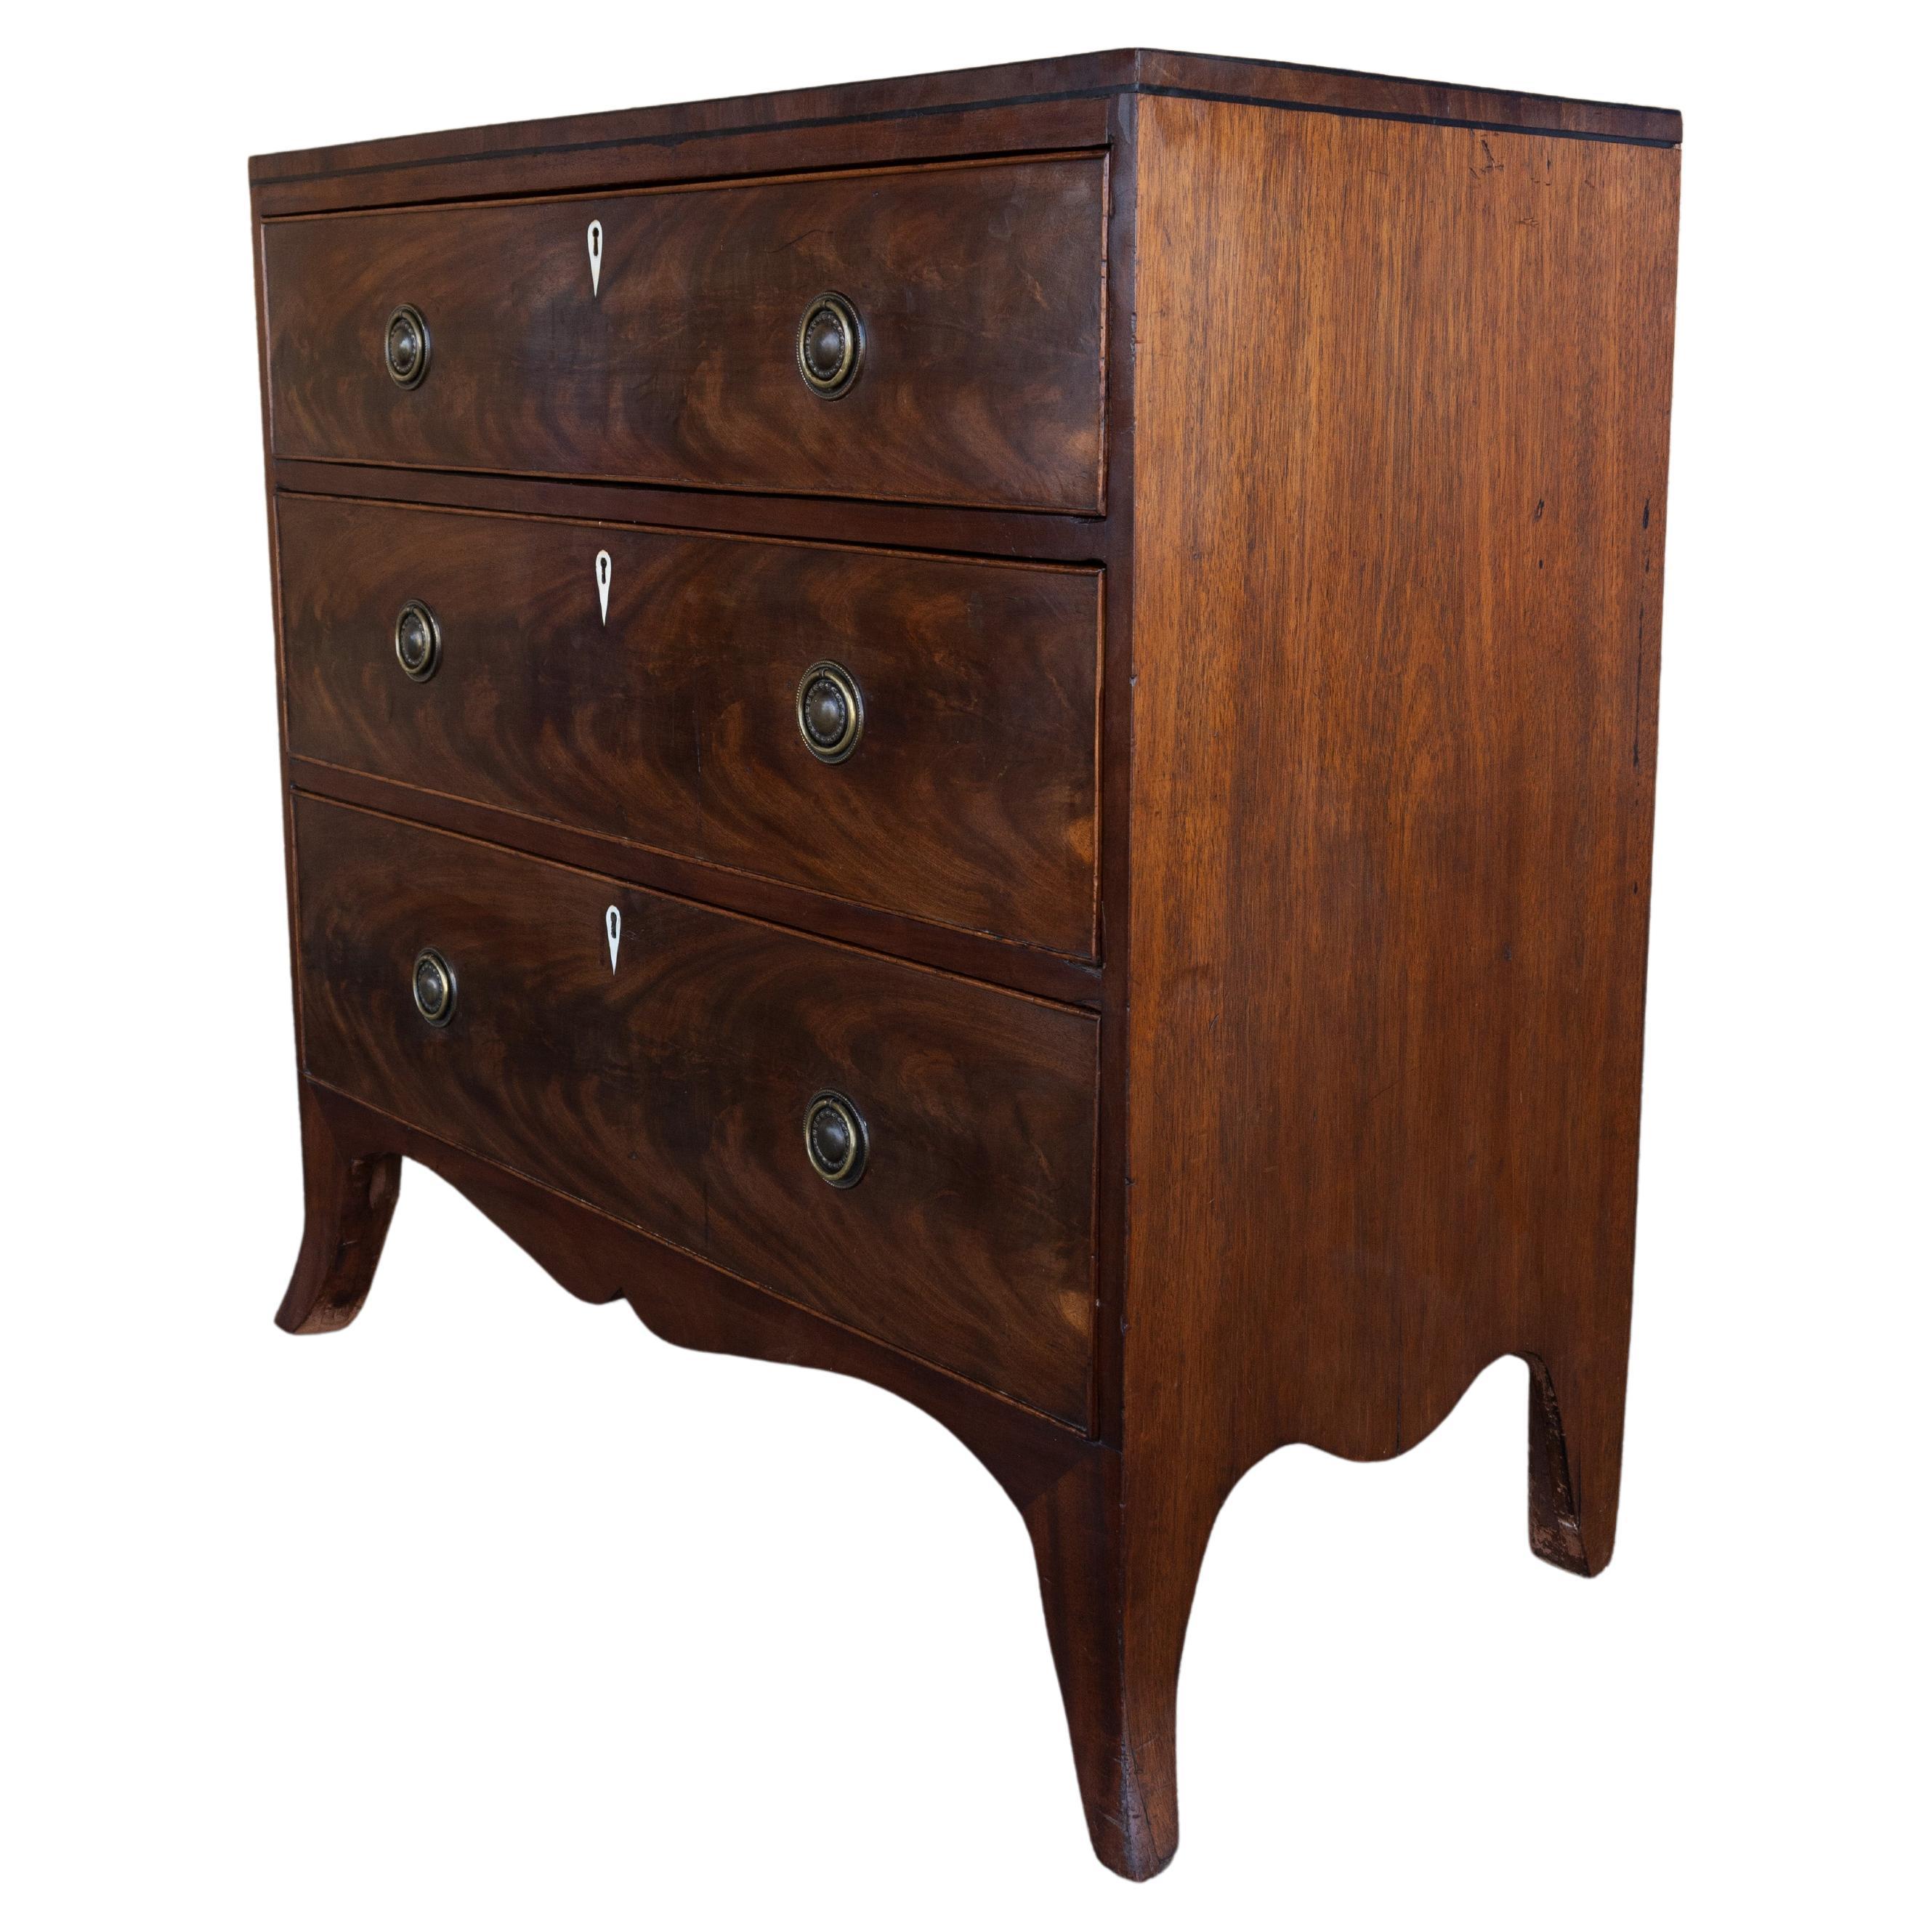 Antique English 19th Century Regency Diminutive Chest Of Drawers C.1810 For Sale 2